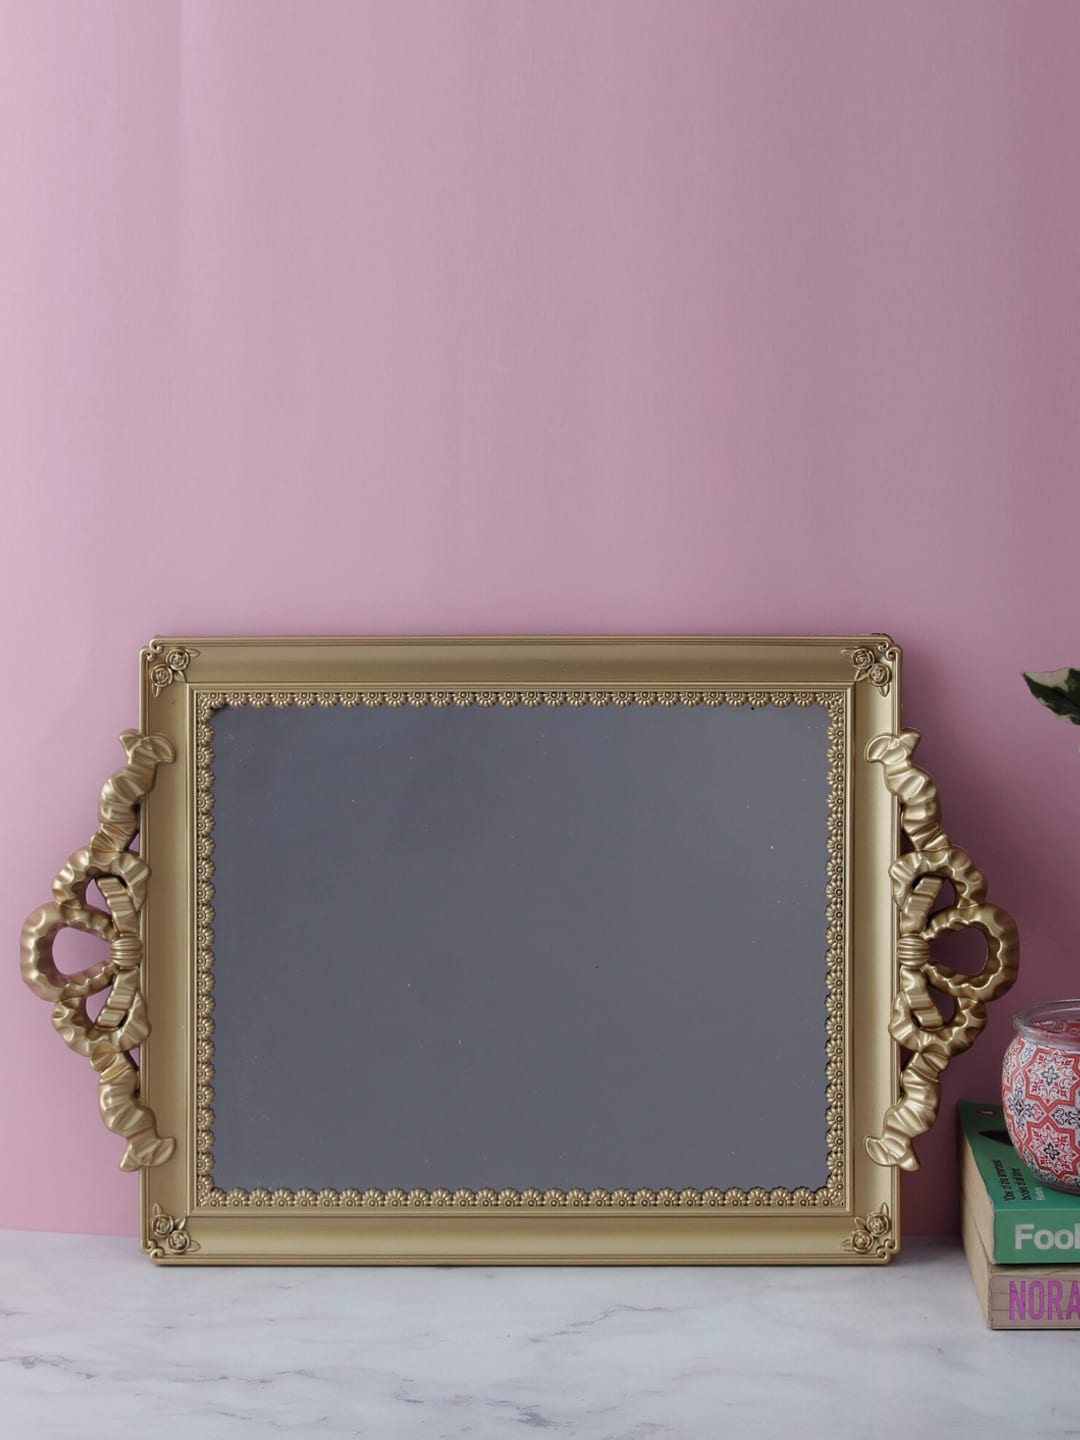 A Vintage Affair- Home Decor Gold-Toned Antique Decorative Mirror Tray Mirrors Price in India